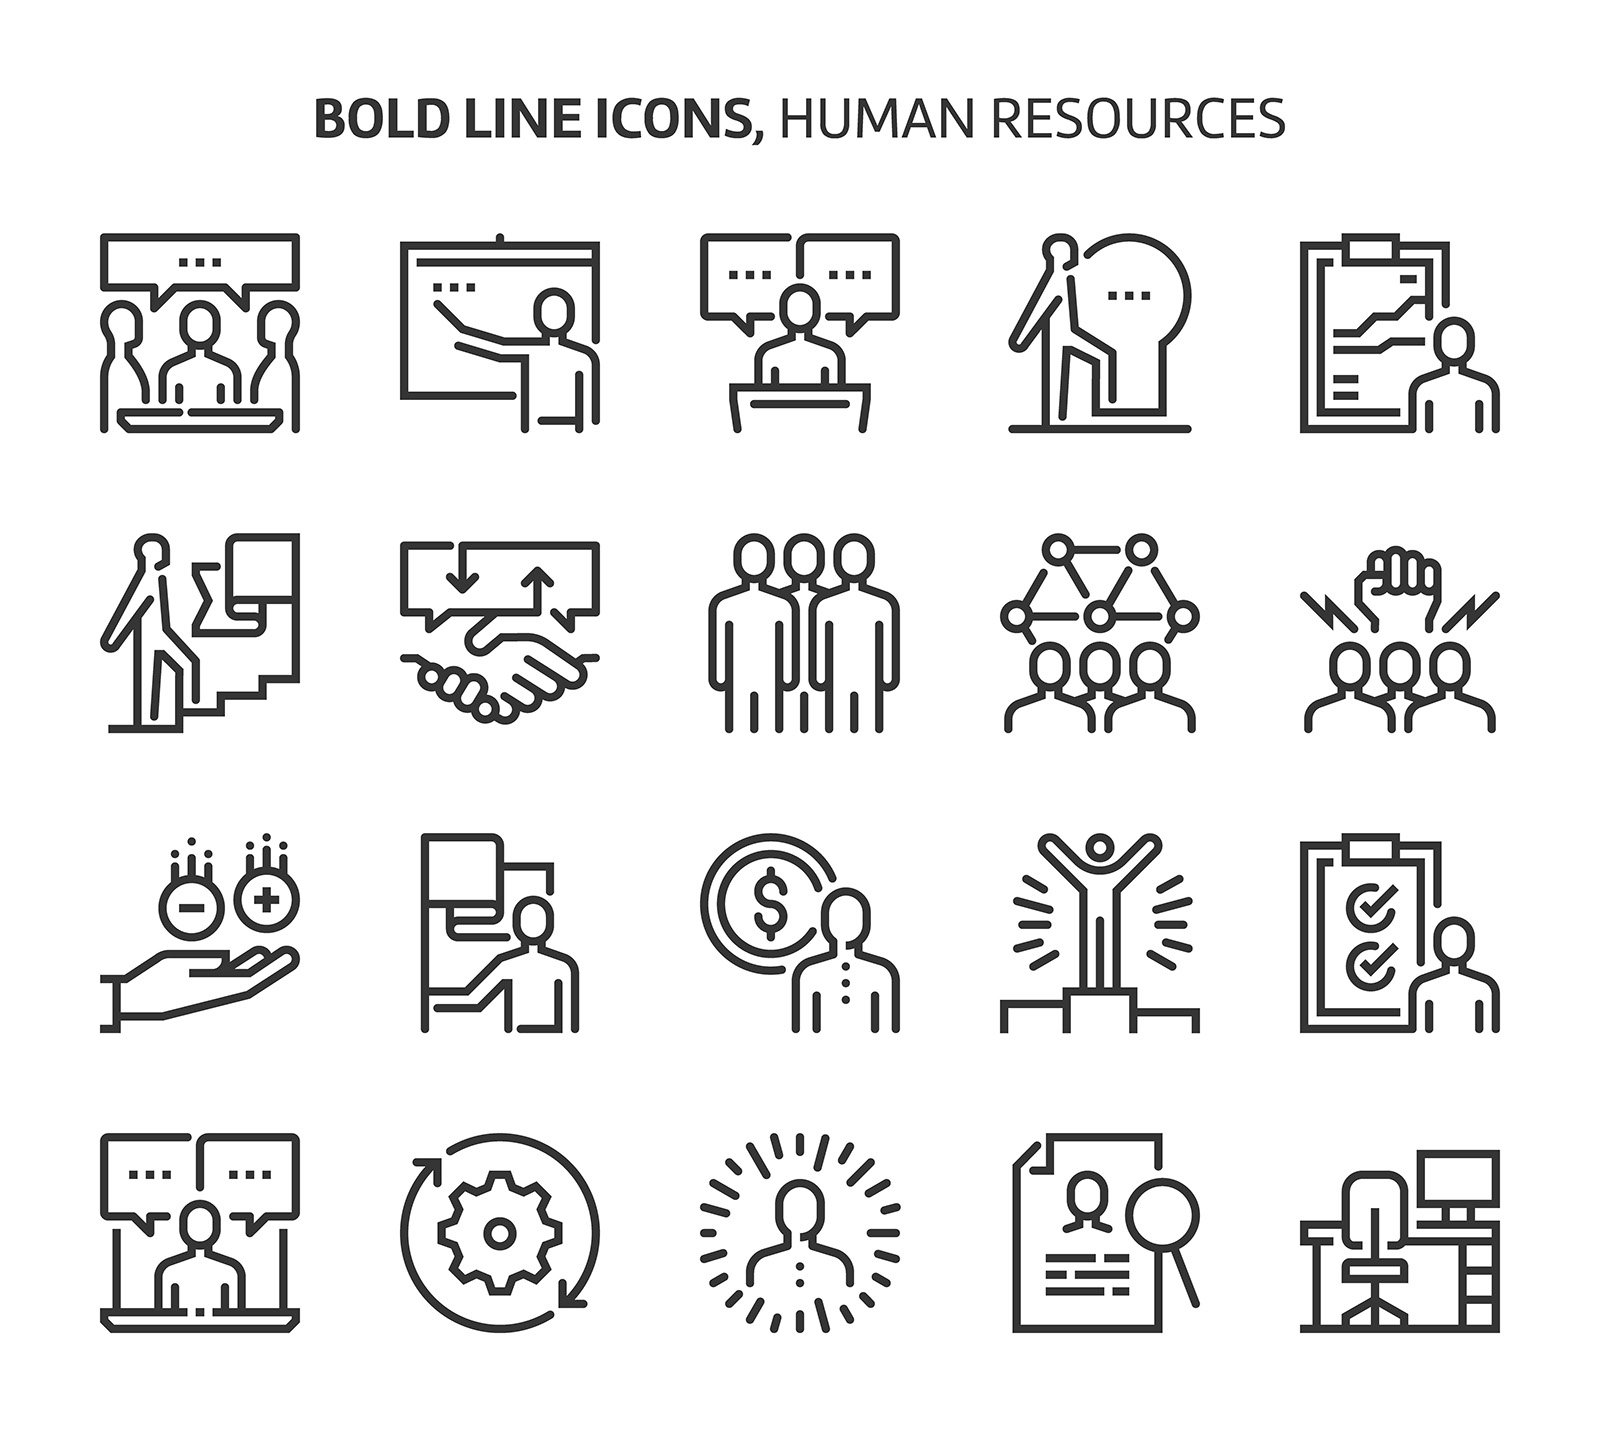 Human resources, bold line icons. cover image.